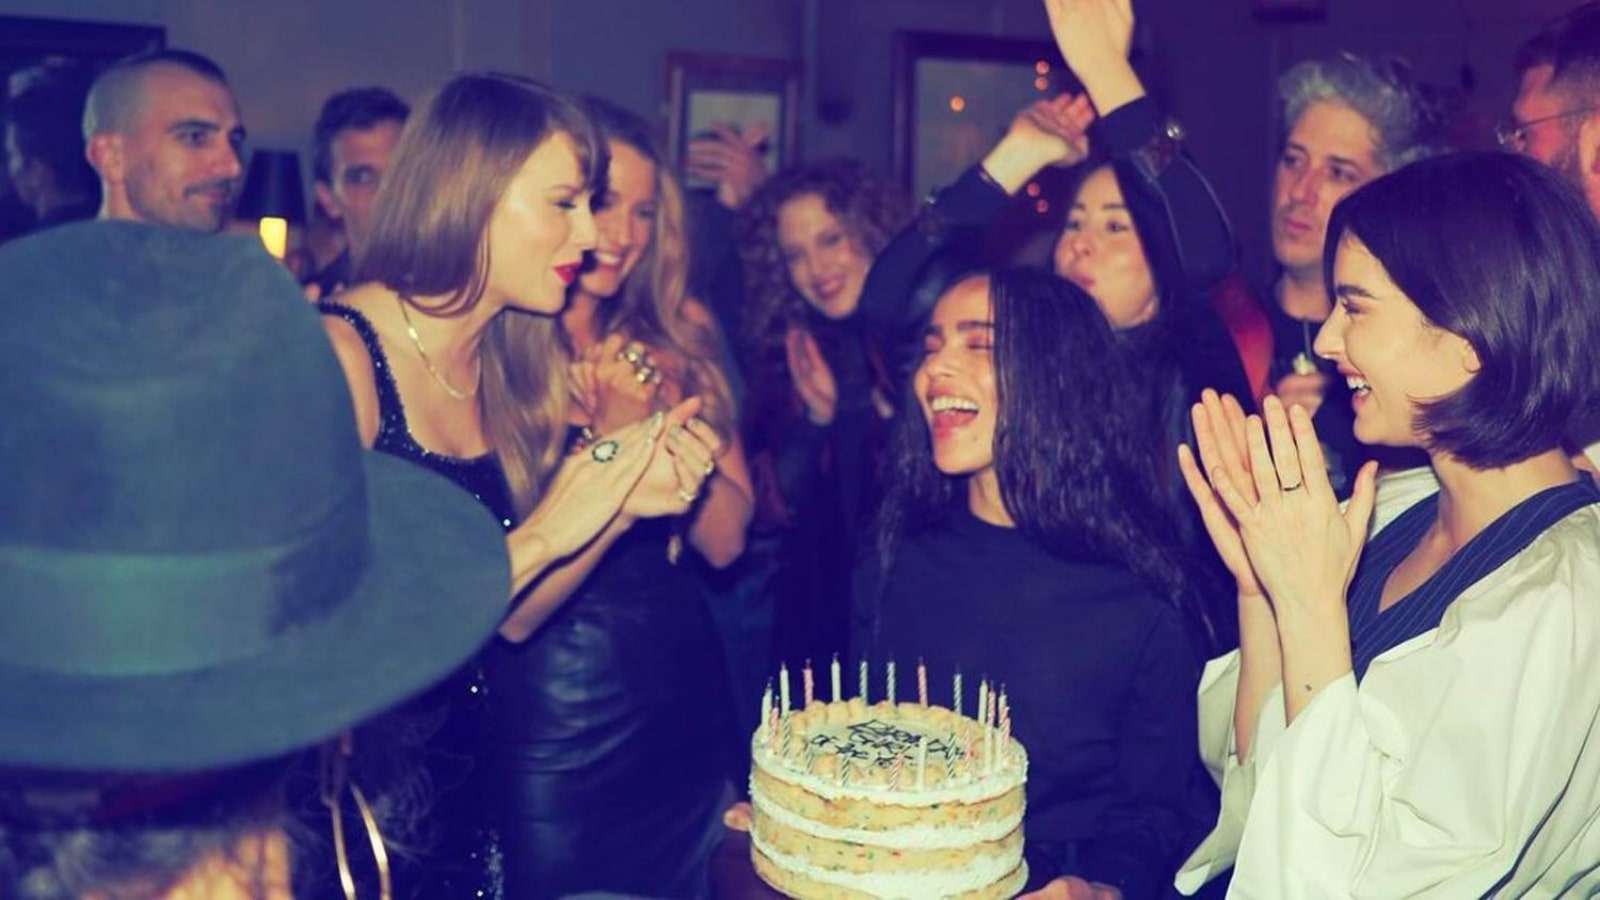 Taylor Swift and friends gathered around a birthday cake